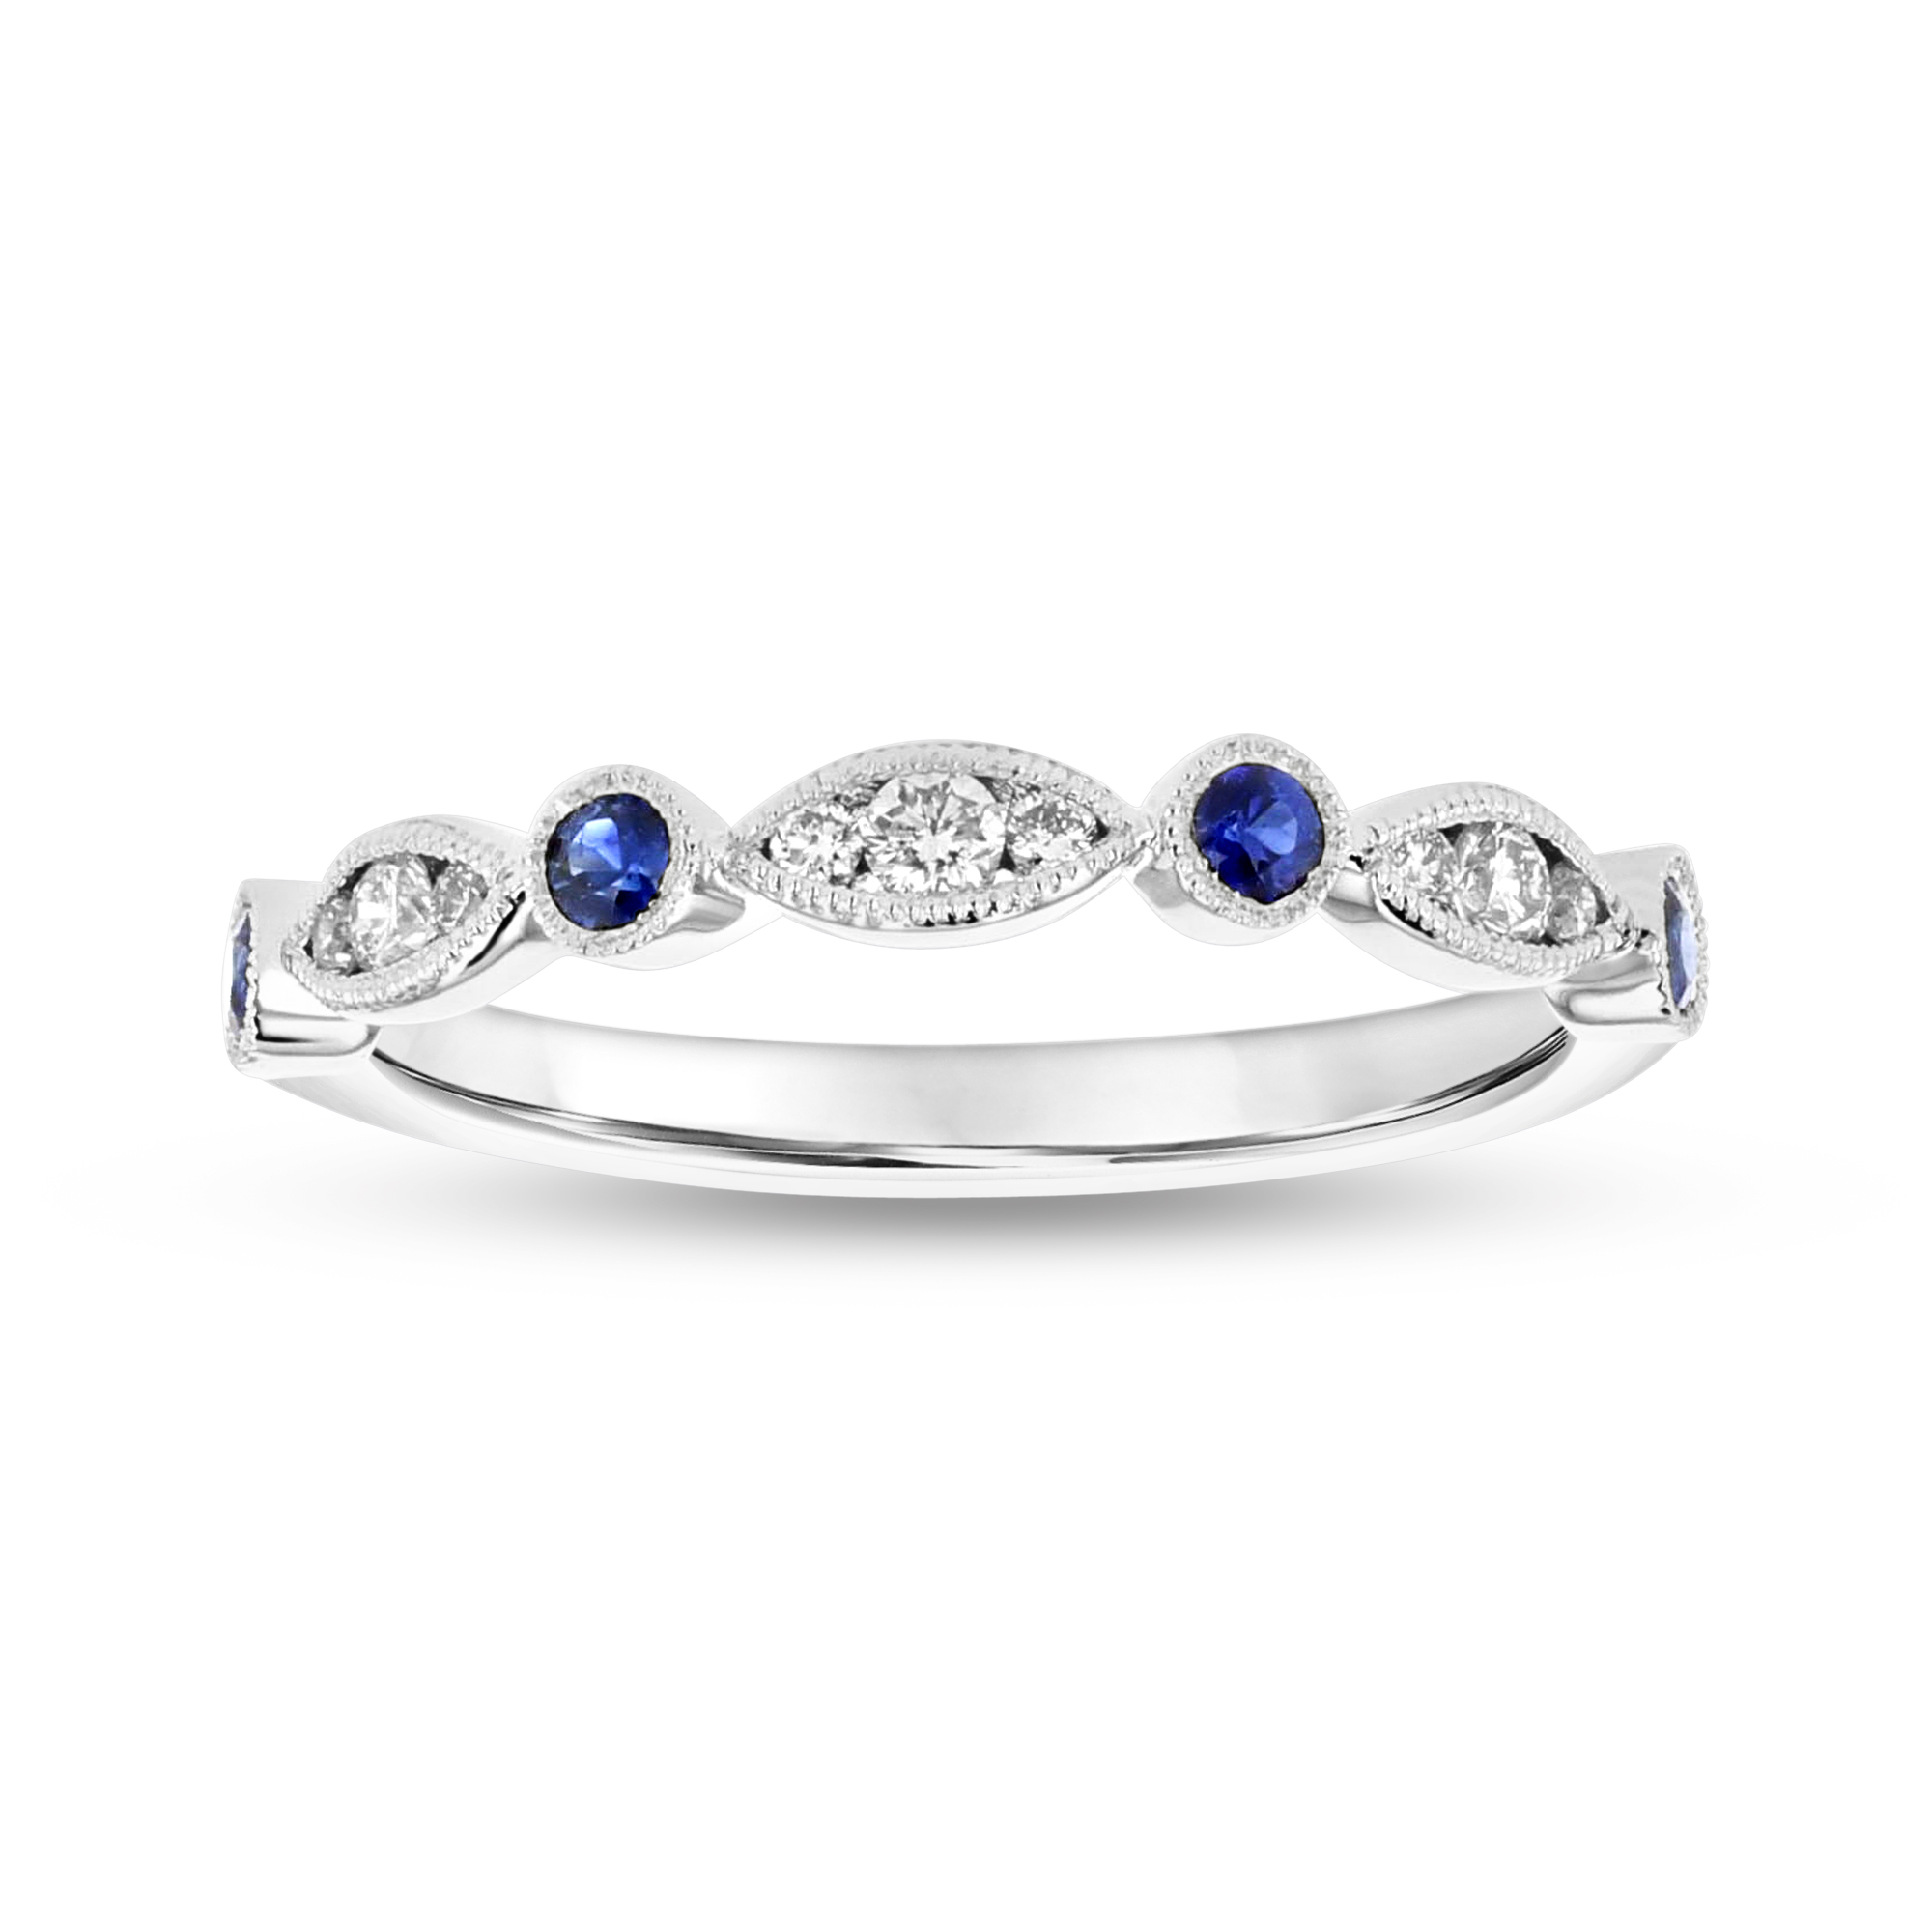 View 0.16ctw Diamond and Sapphire Band in 18k White Gold